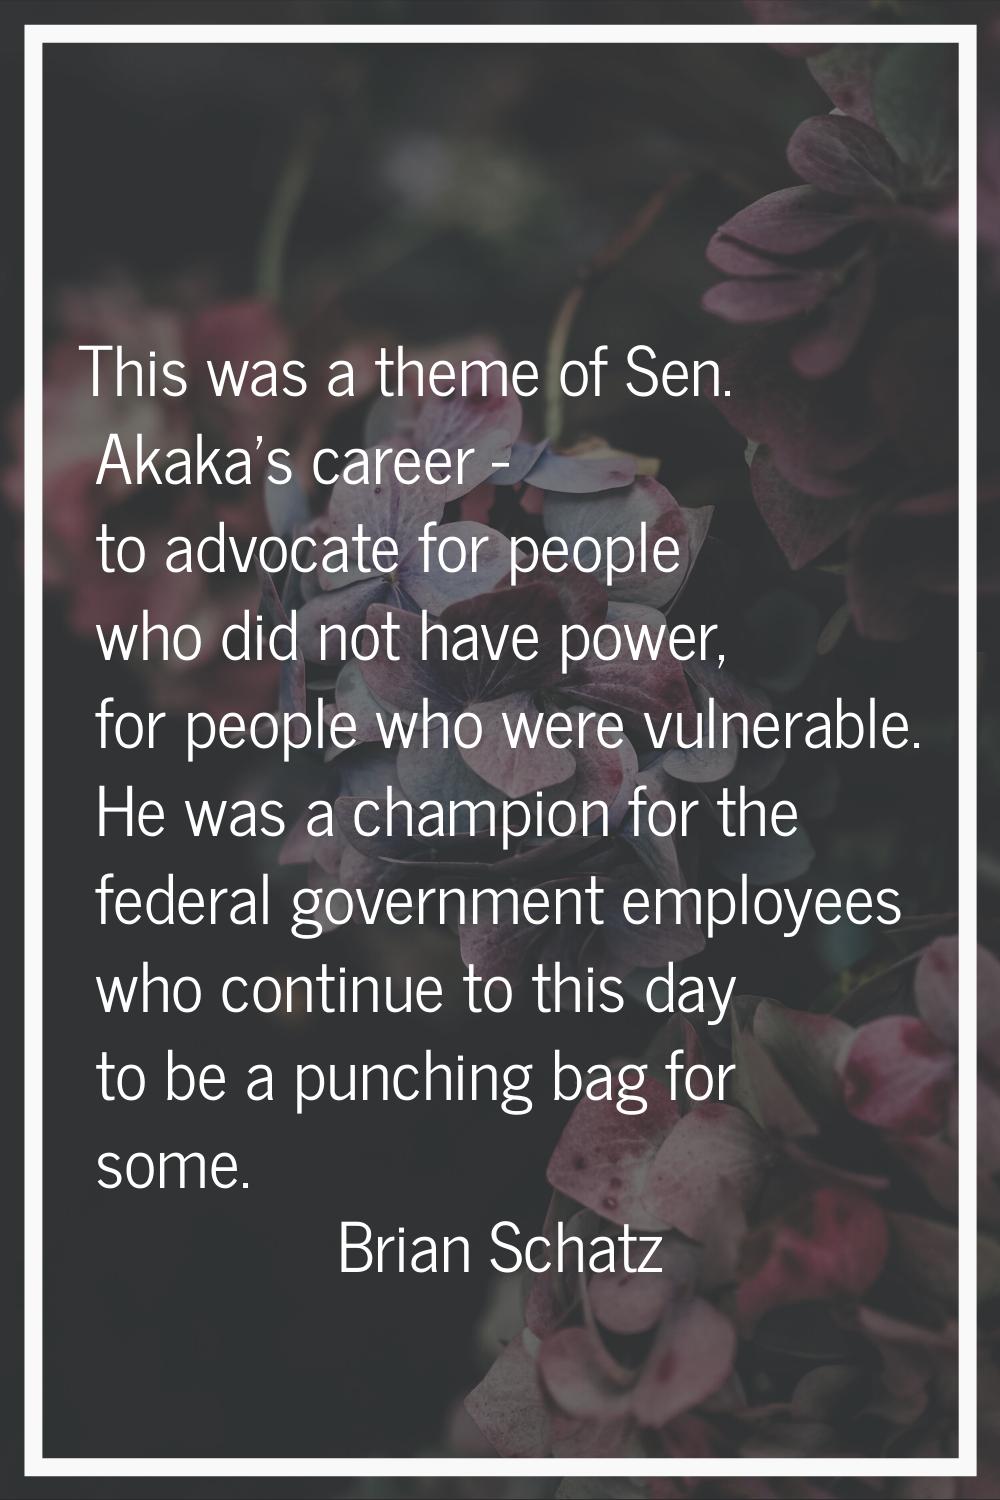 This was a theme of Sen. Akaka's career - to advocate for people who did not have power, for people